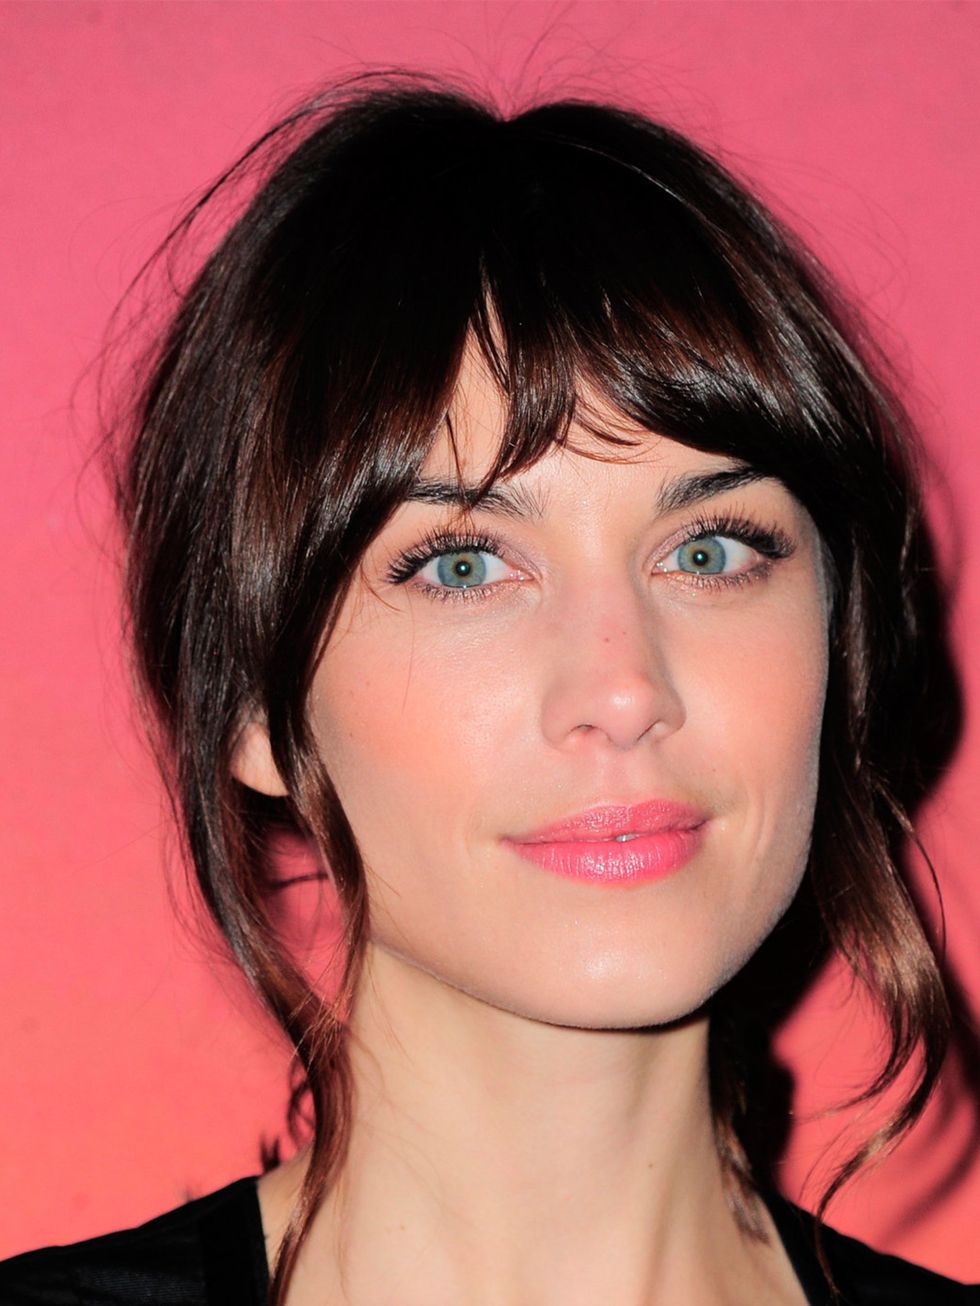 <p><a href="http://www.elleuk.com/star-style/celebrity-style-files/alexa-chung-s-style-file">Alexa Chung</a></p>